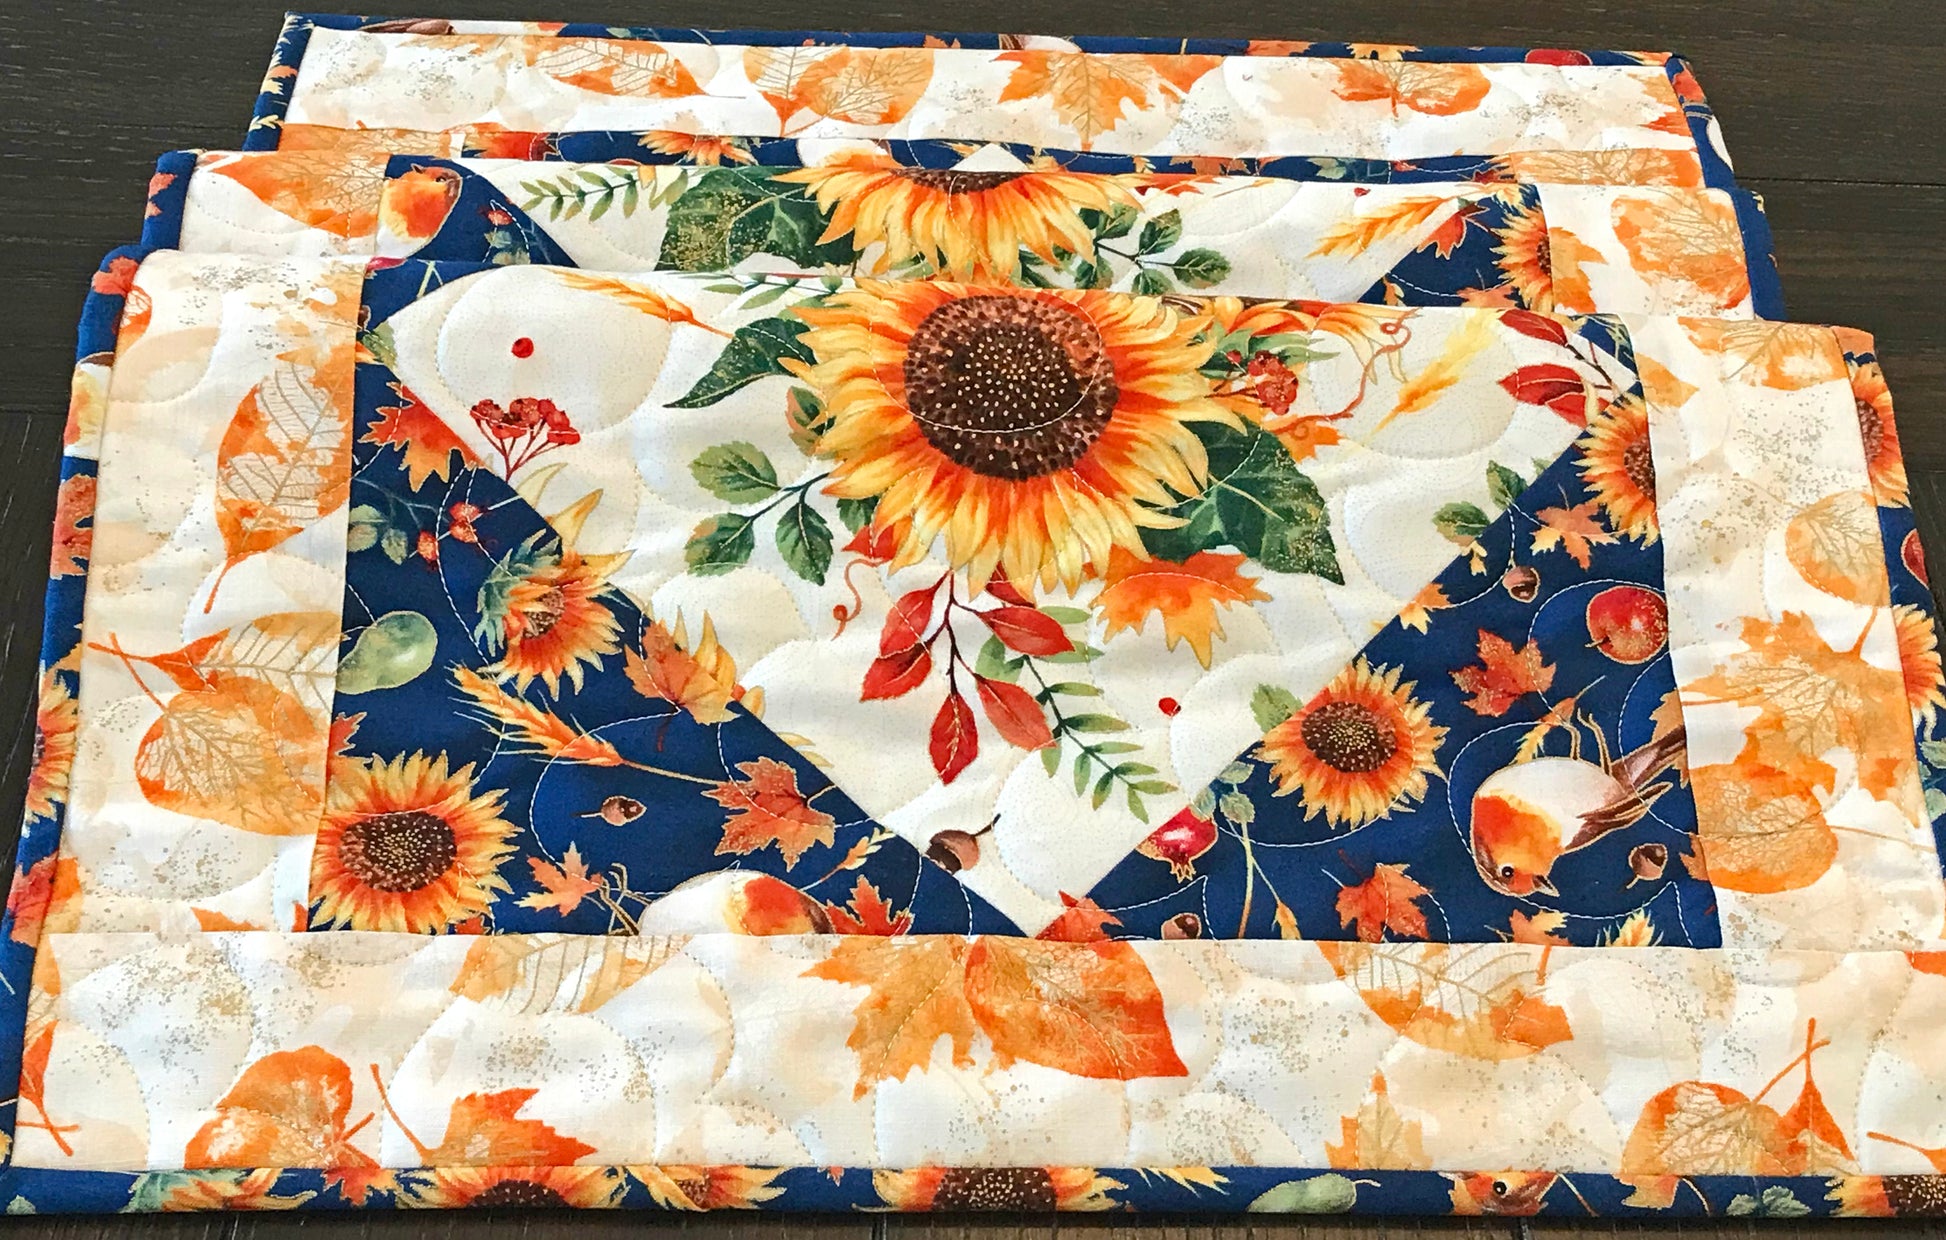 close up of Sunflower themed fall table runner with a center diamond pattern of sunflowers surrounded by gold leaves and dark blue accents displayed on a table